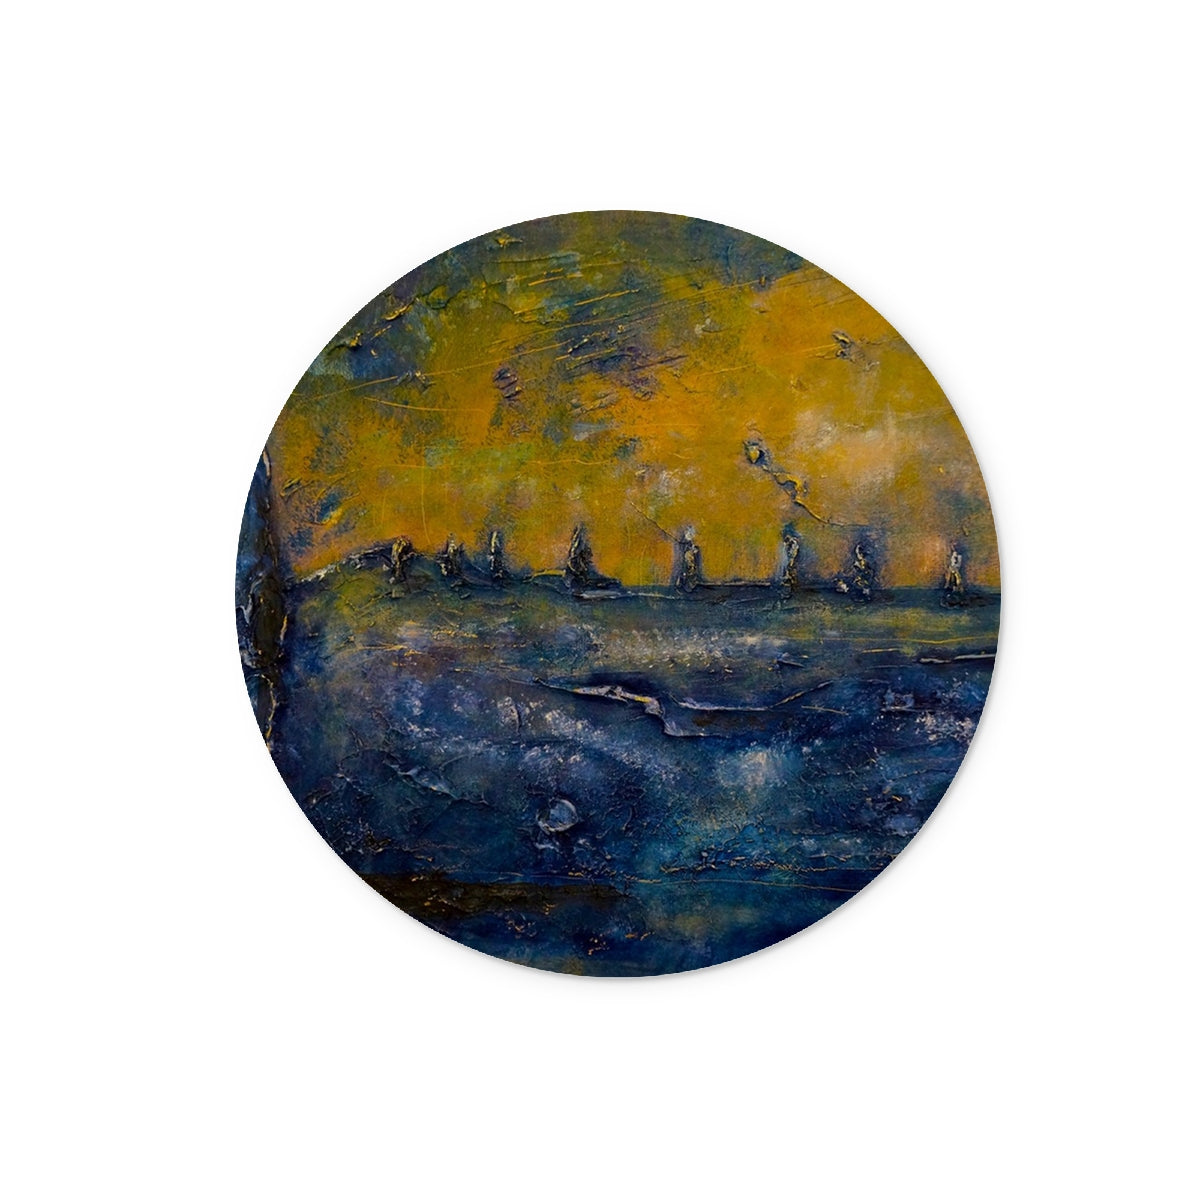 Brodgar Moonlight Orkney Art Gifts Glass Chopping Board-Glass Chopping Boards-Orkney Art Gallery-12" Round-Paintings, Prints, Homeware, Art Gifts From Scotland By Scottish Artist Kevin Hunter